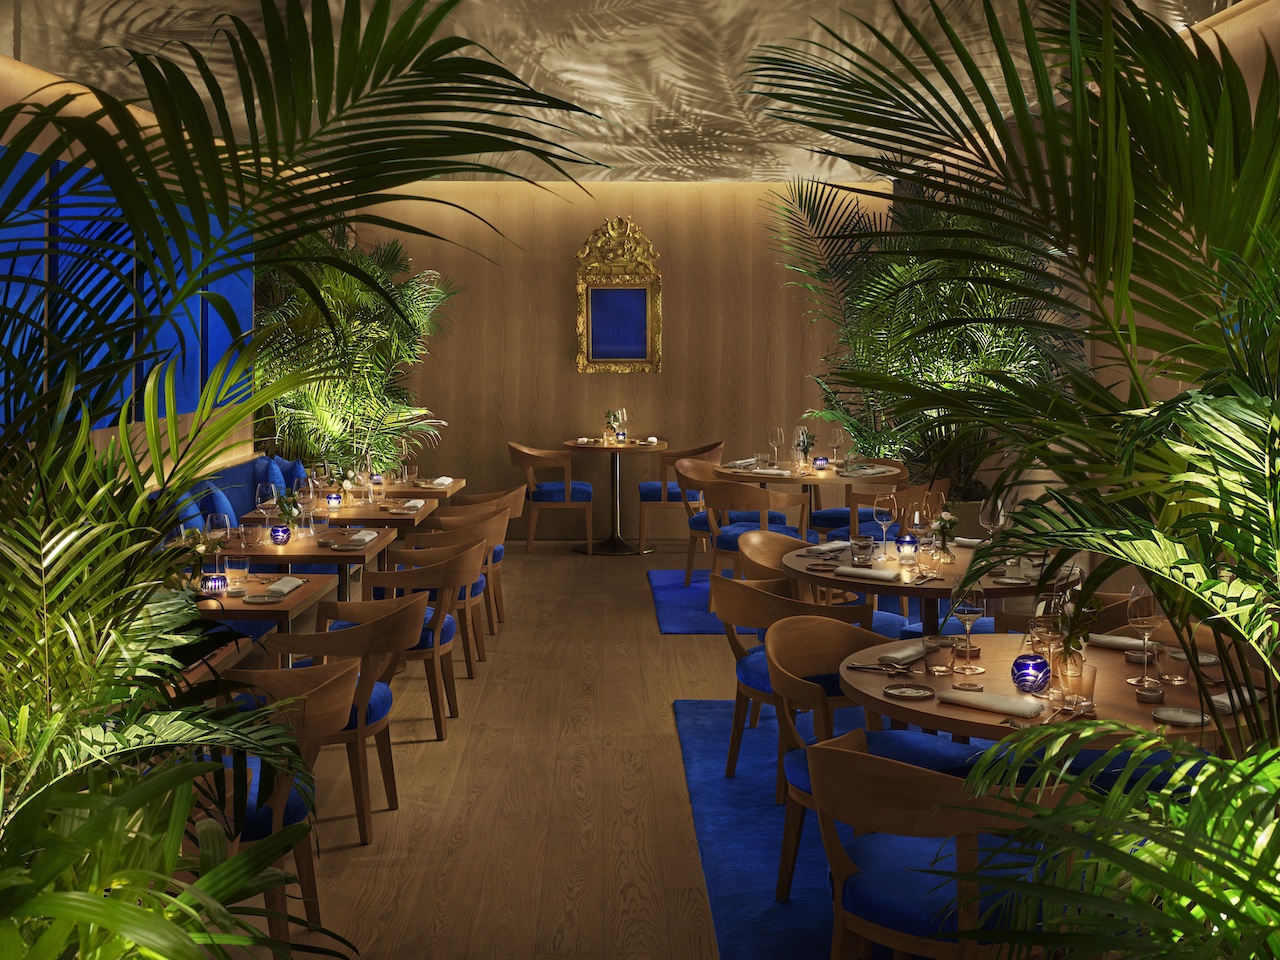 The Rome EDITION is set to dazzle with a spectacular range of restaurants and bars, including Anima, spearheaded by much admired Roman chef Paola Colucci.